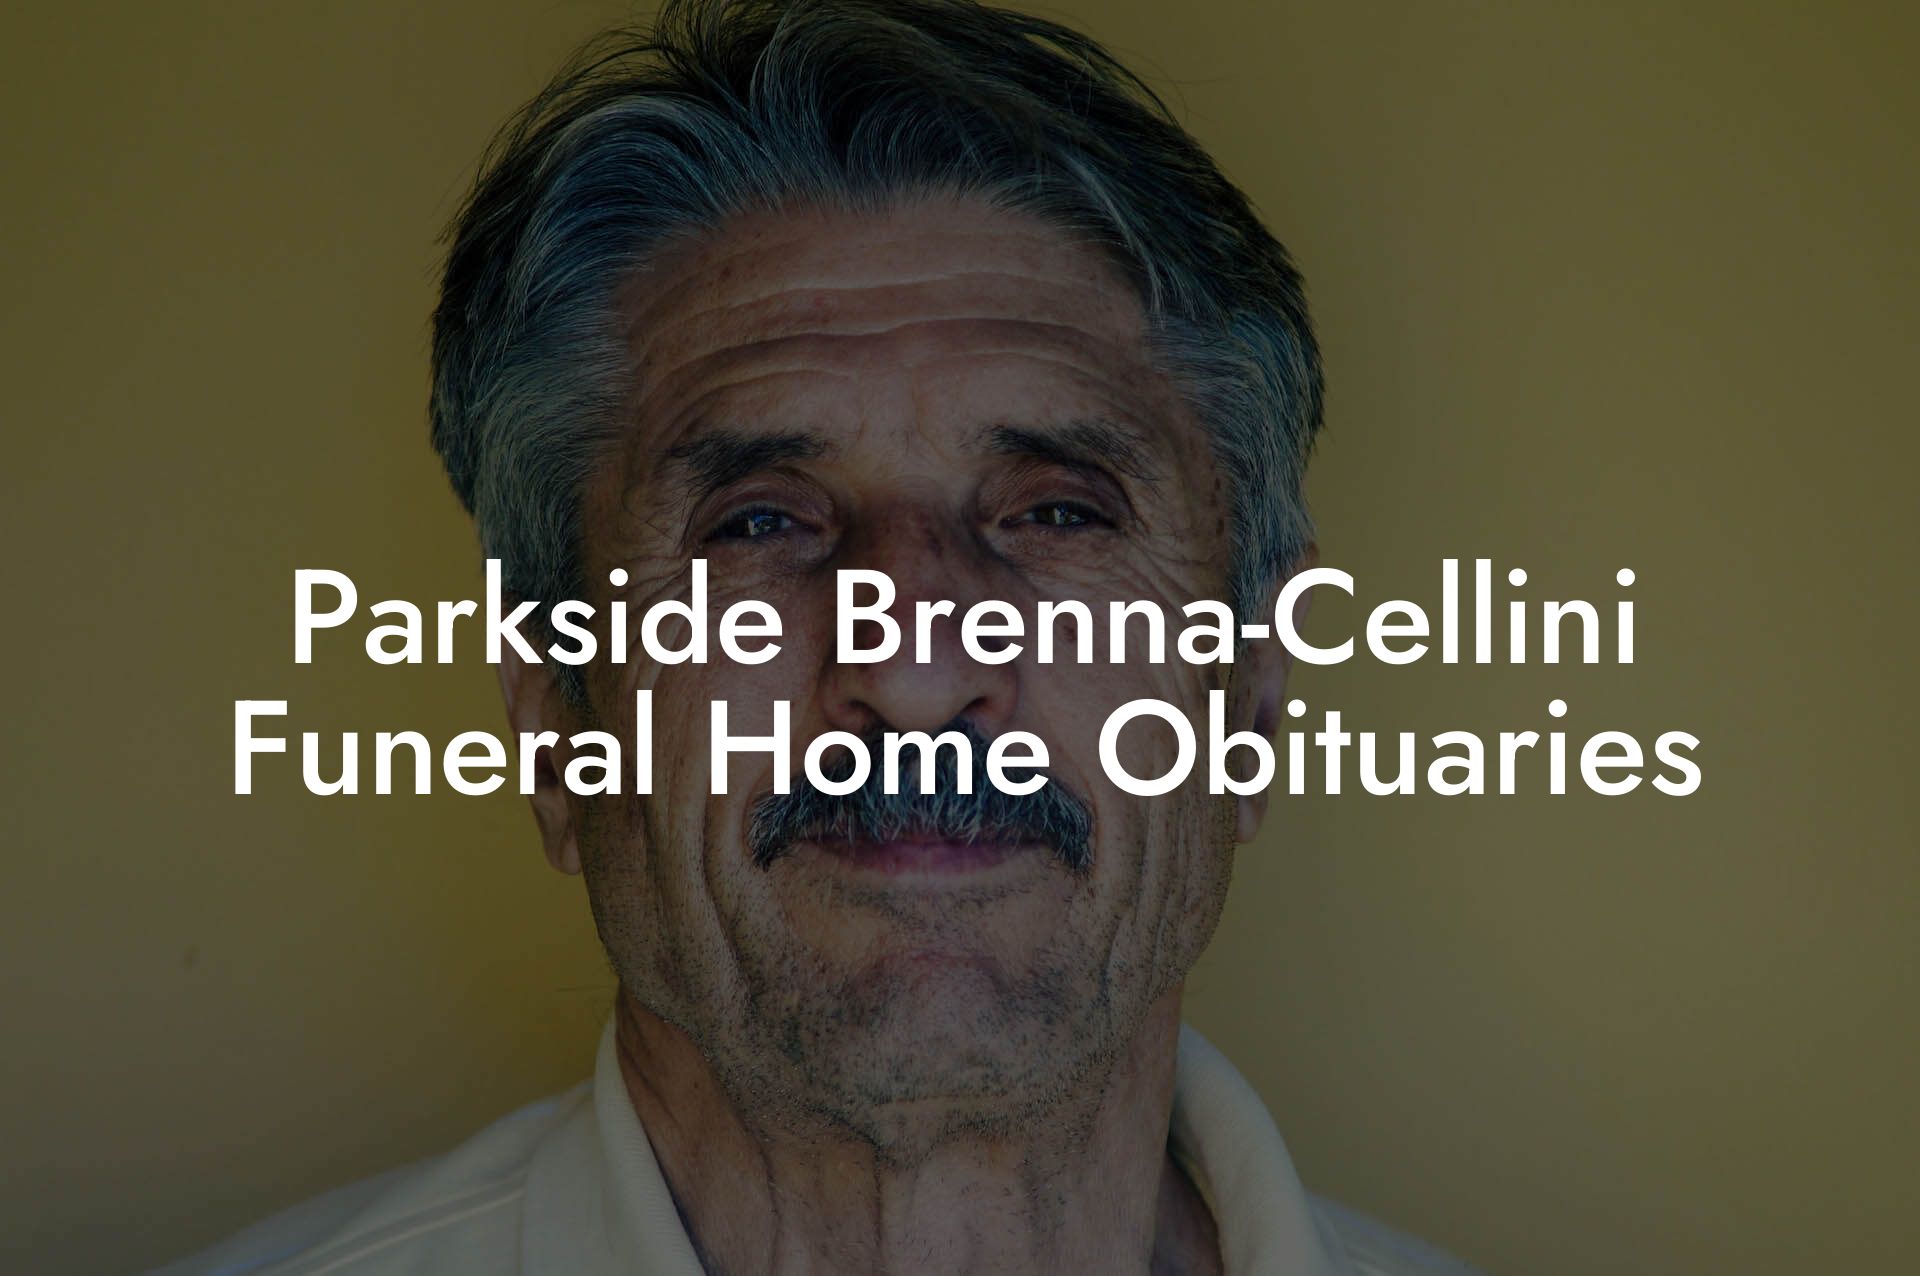 Parkside Brenna-Cellini Funeral Home Obituaries